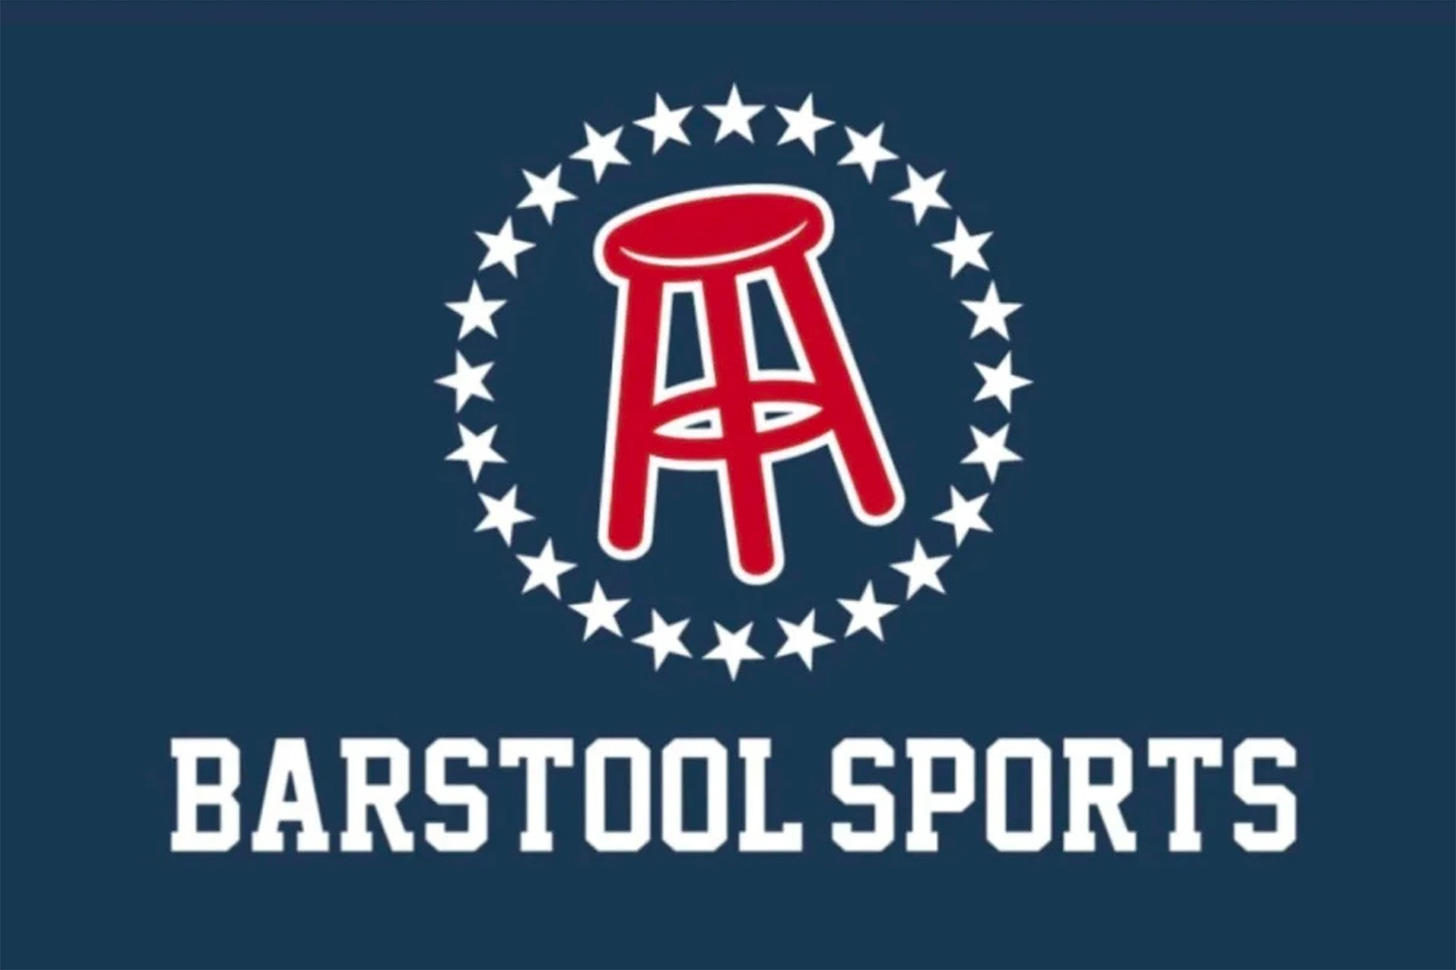 Barstool Sports uses N-word in new podcast episode title